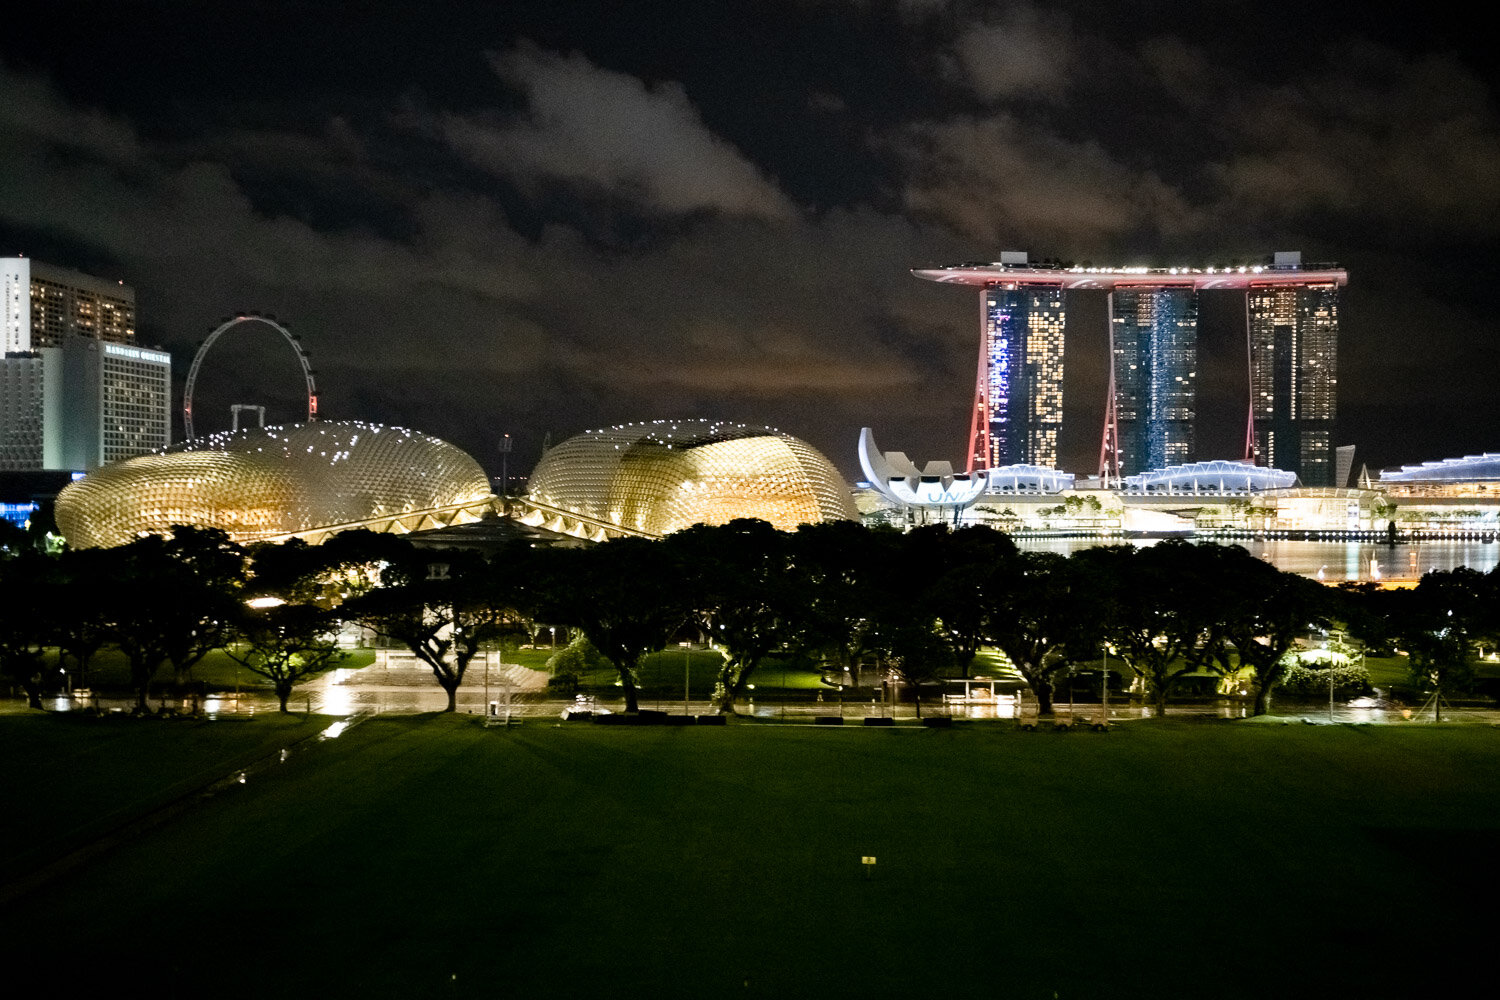 Singapore’s Skyline: The Mandarin Oriental (with the heart), the Singapore Flyer (Ferris wheel), the Opera (gold), the ArtScience Museum (lotus flower), the Marina Bay Sands and the Singapore River.